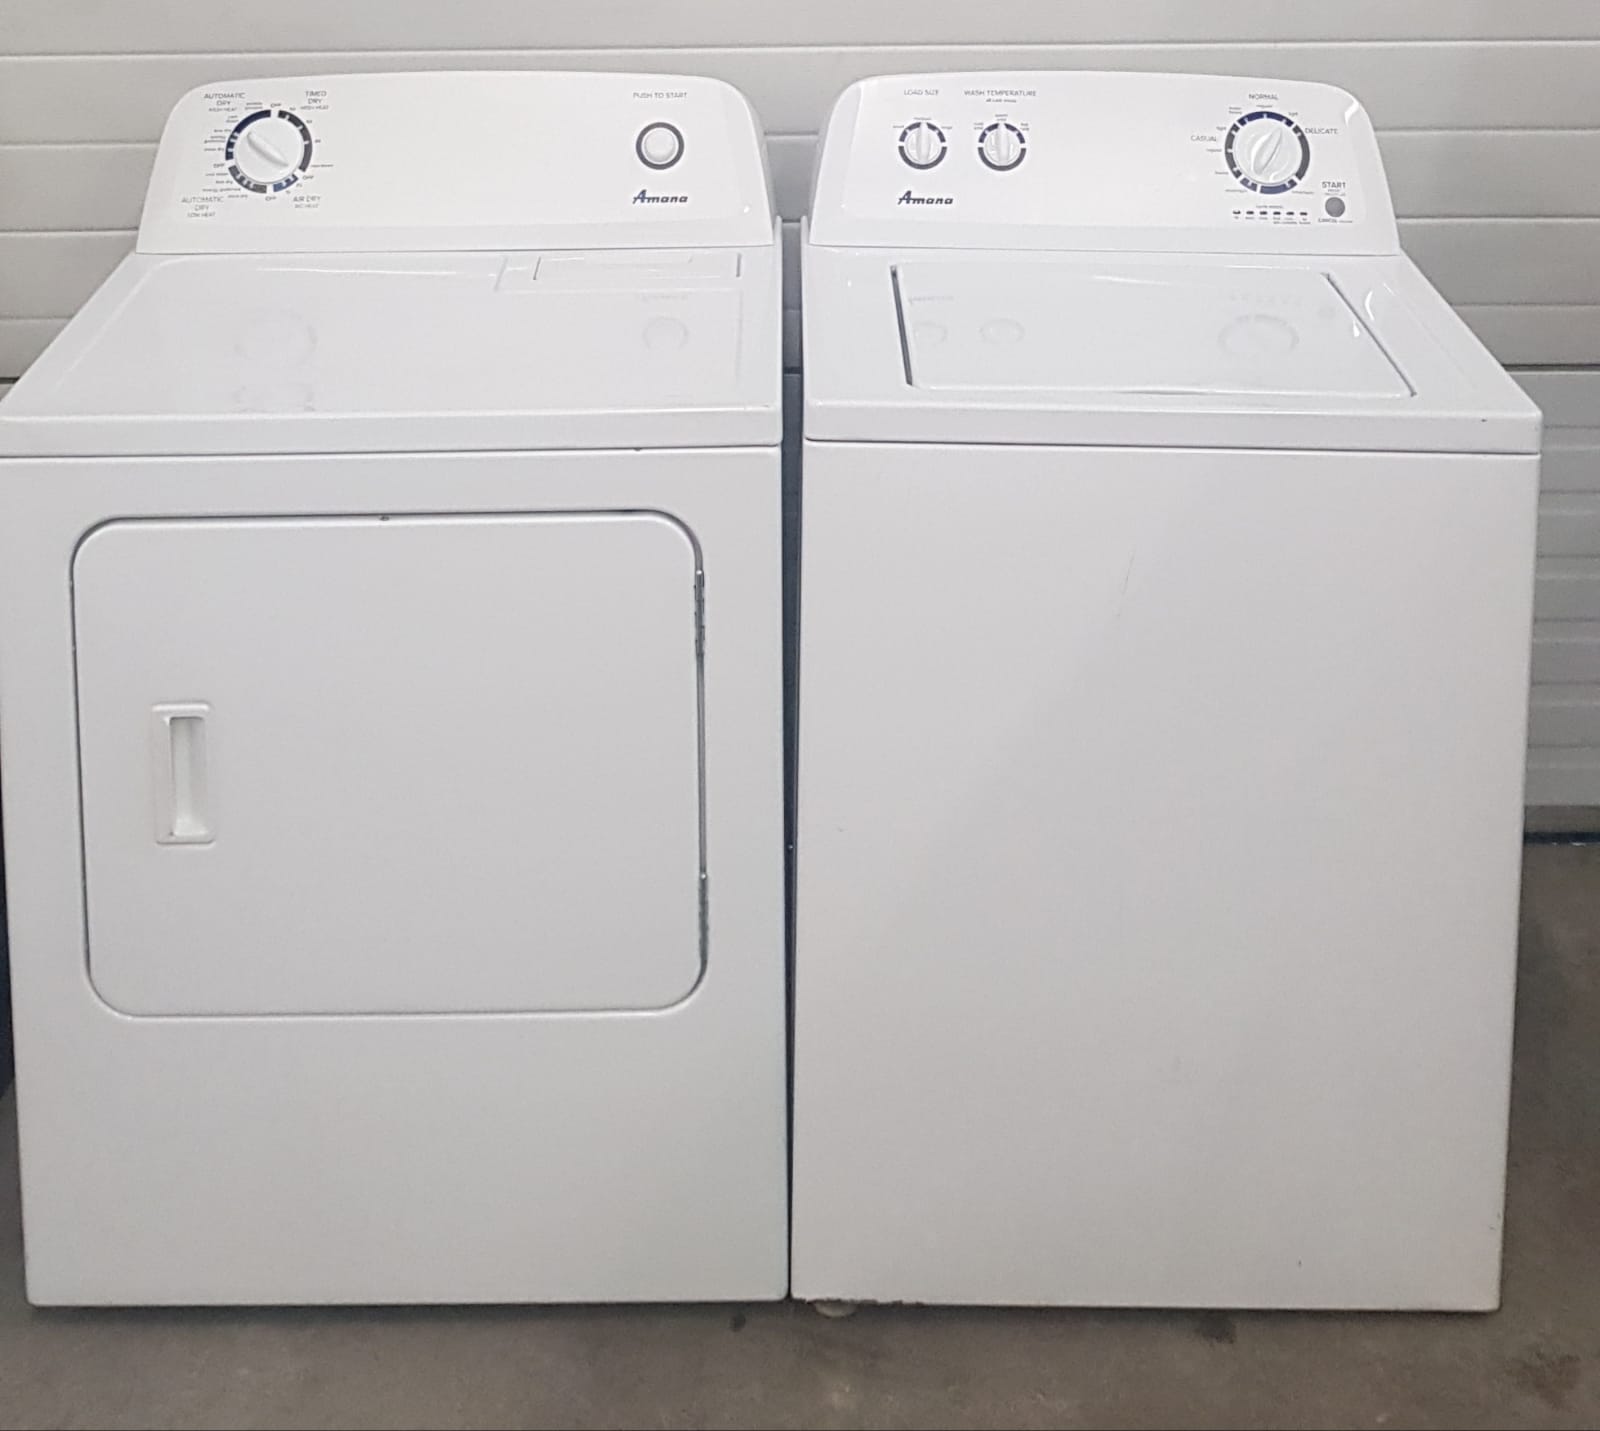 Order Your Amana Set Washer And Dryer - Ntw4600yq1 And Yned4600yq1 Today!